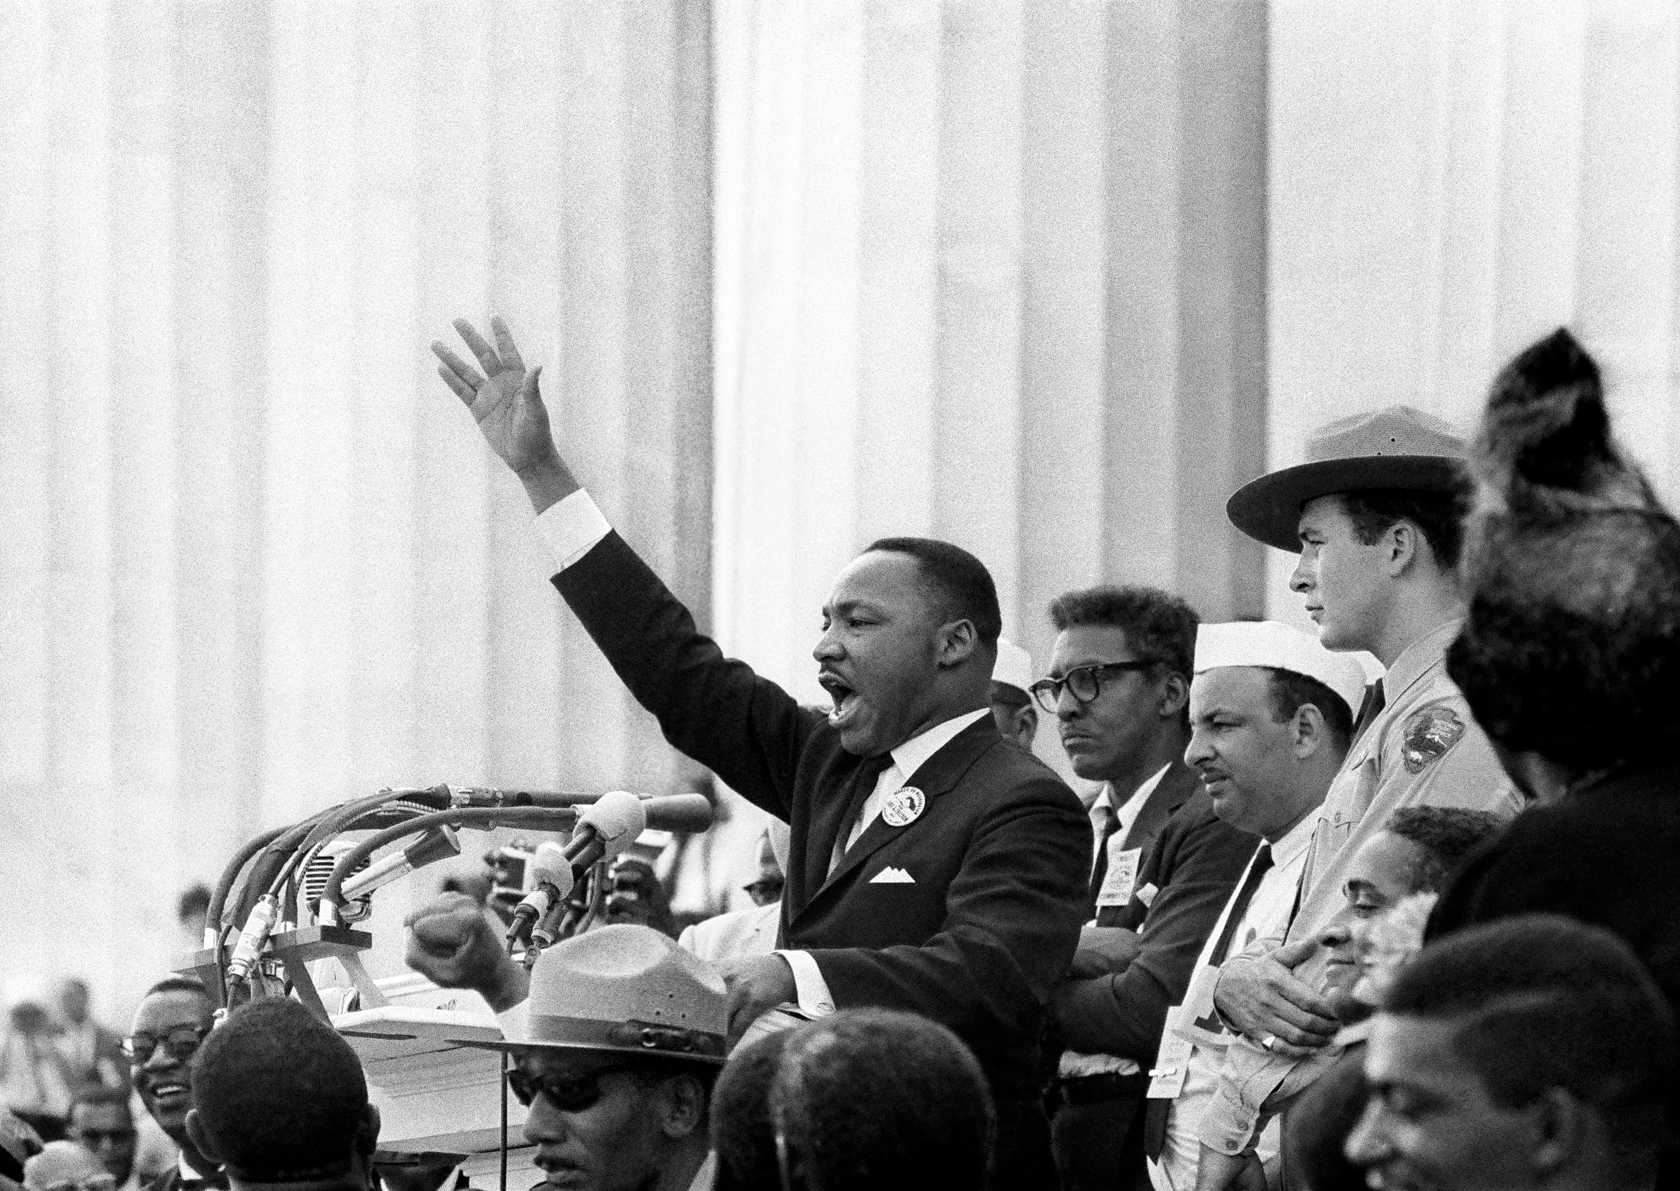 The Dreamer dreams: King ends his speech with the words of the old Negro spiritual, “Free at last! Free at last! Thank God Almighty, we are free at last!”   Washington,  D.C.  1963